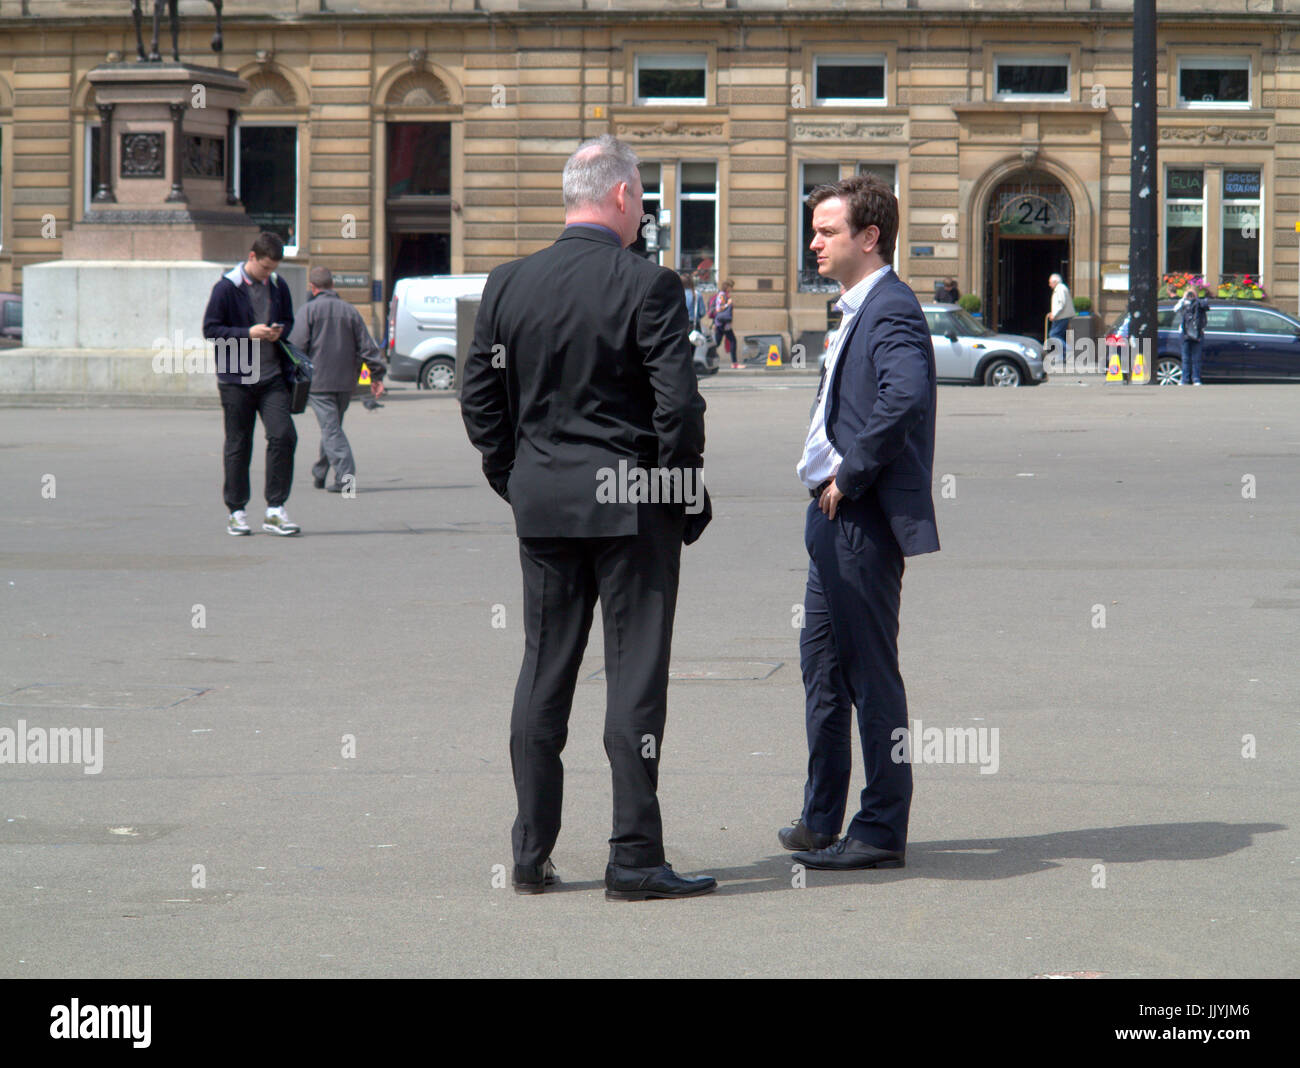 businessmen in suits talking on the street in George square Glasgow Stock Photo